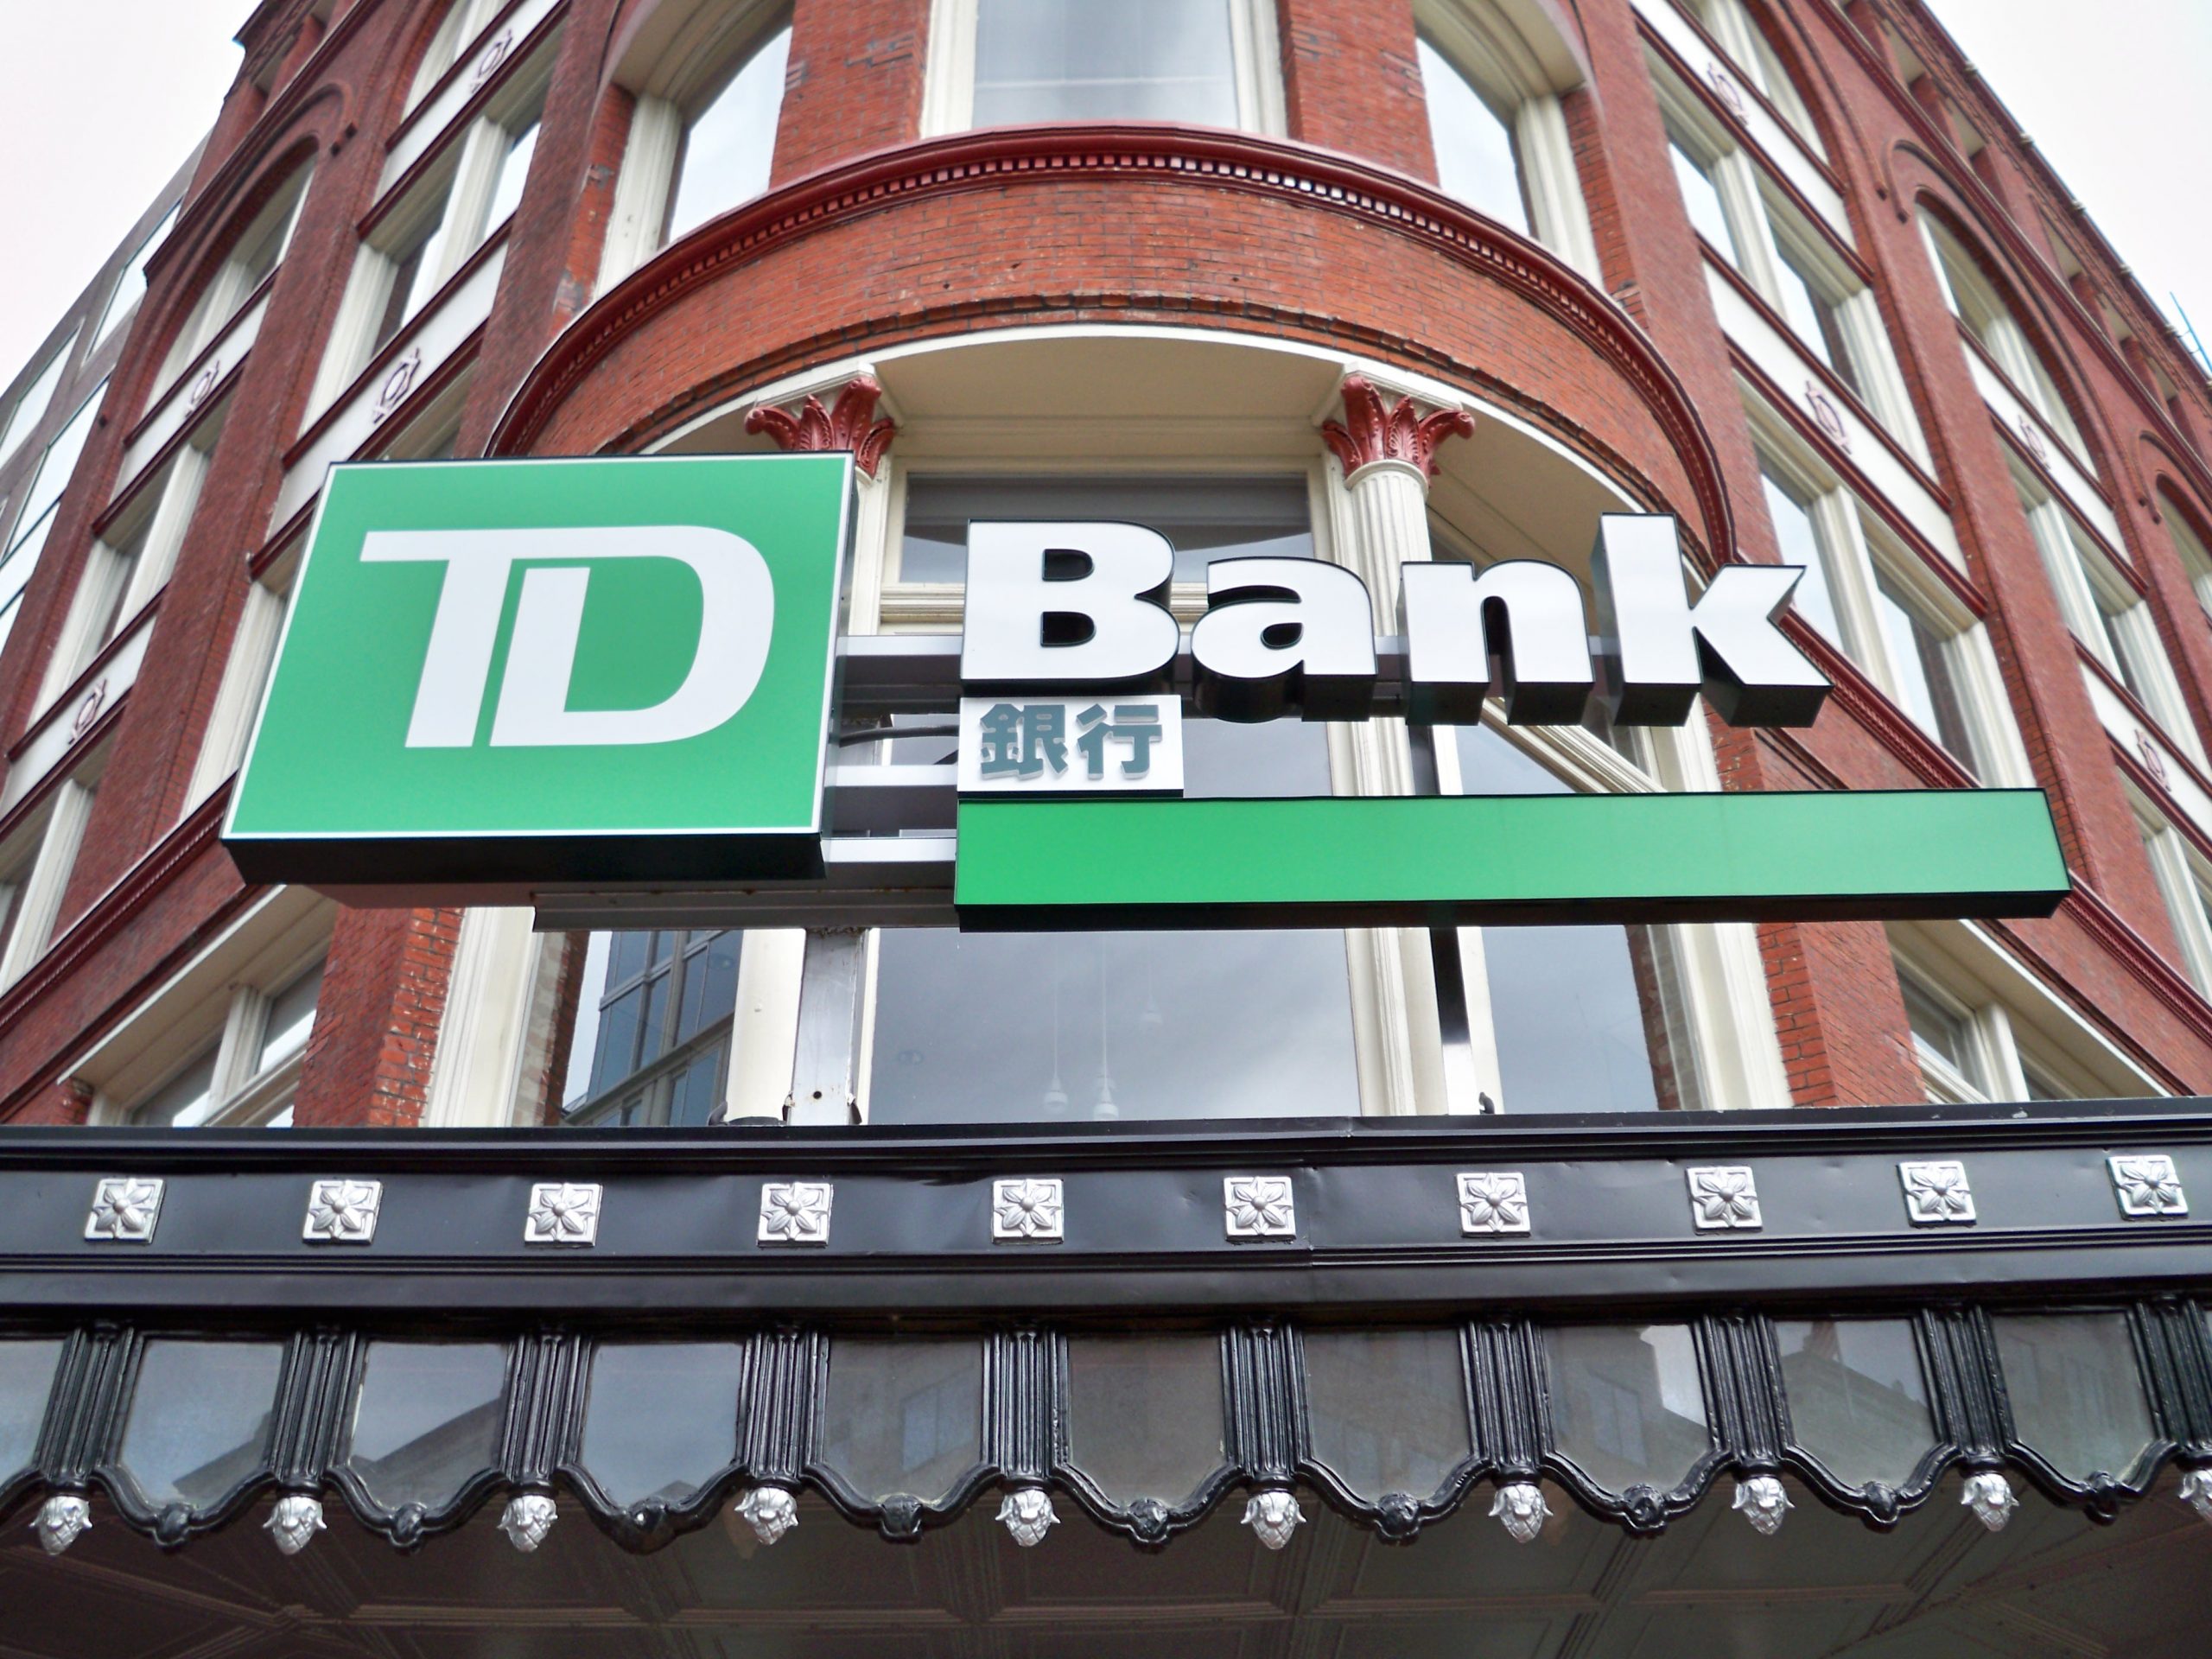 TD Bank ATM Balance Fee Class Action Lawsuit 9 To Check Balance?